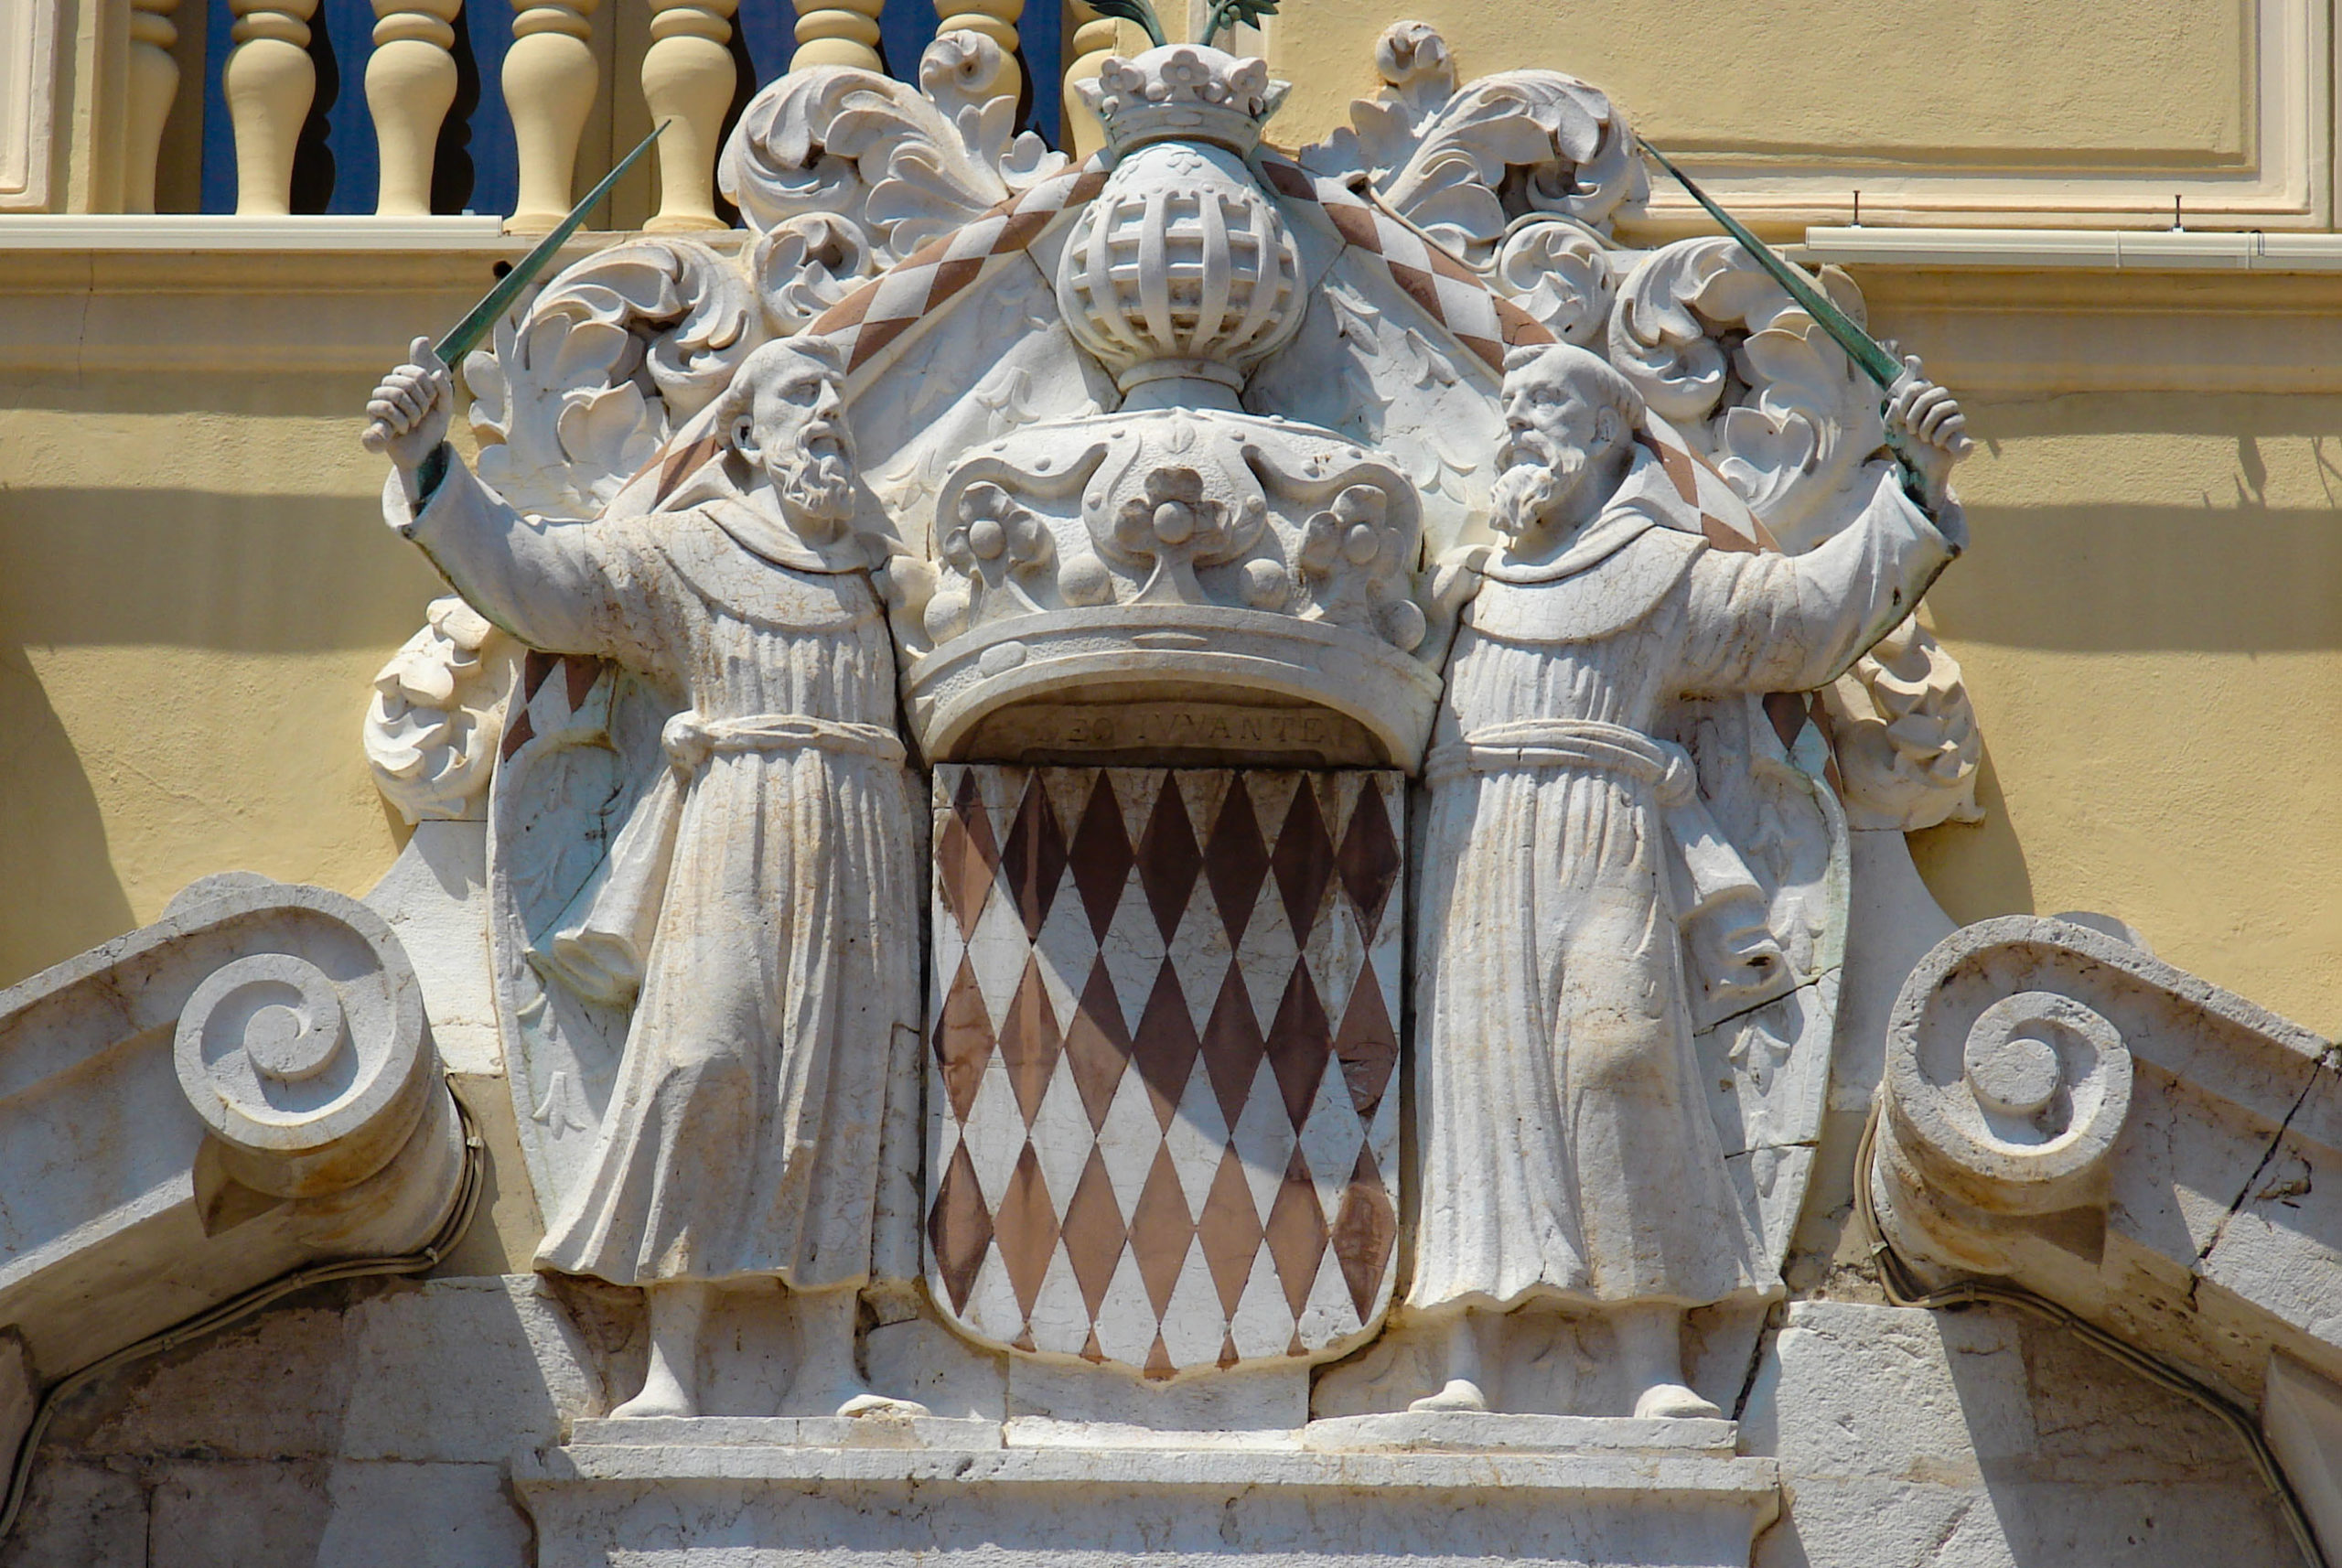 Monaco Coat of Arms, Prince's Palace of Monaco © avu-edm - licence [CC BY 3.0] from Wikimedia Commons